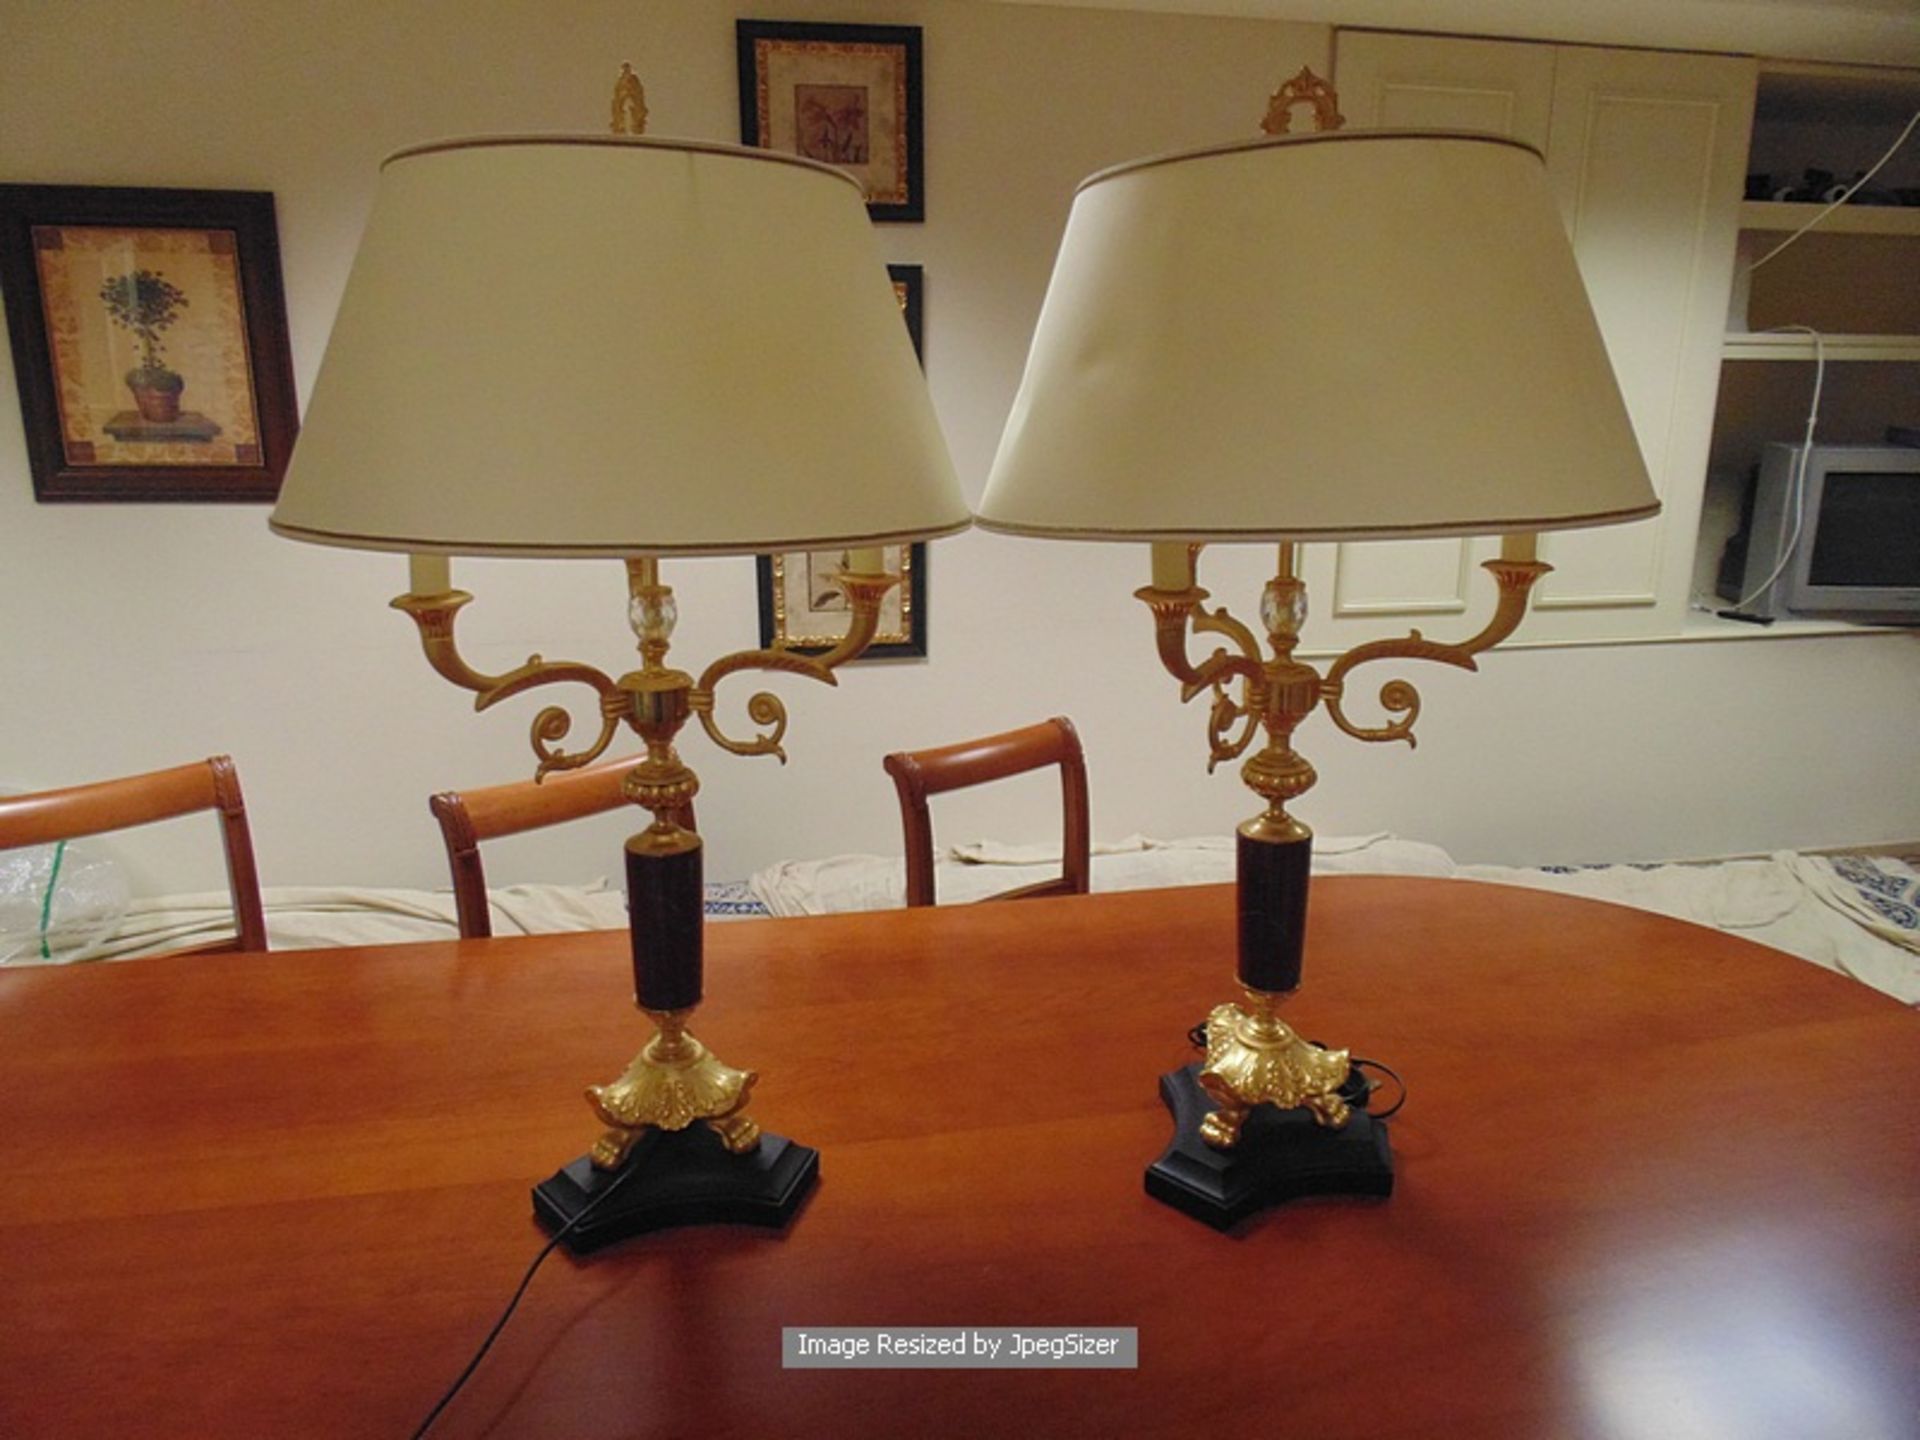 A pair of Laudarte Cariti table lamps, bronze castings, central column in black marble, and